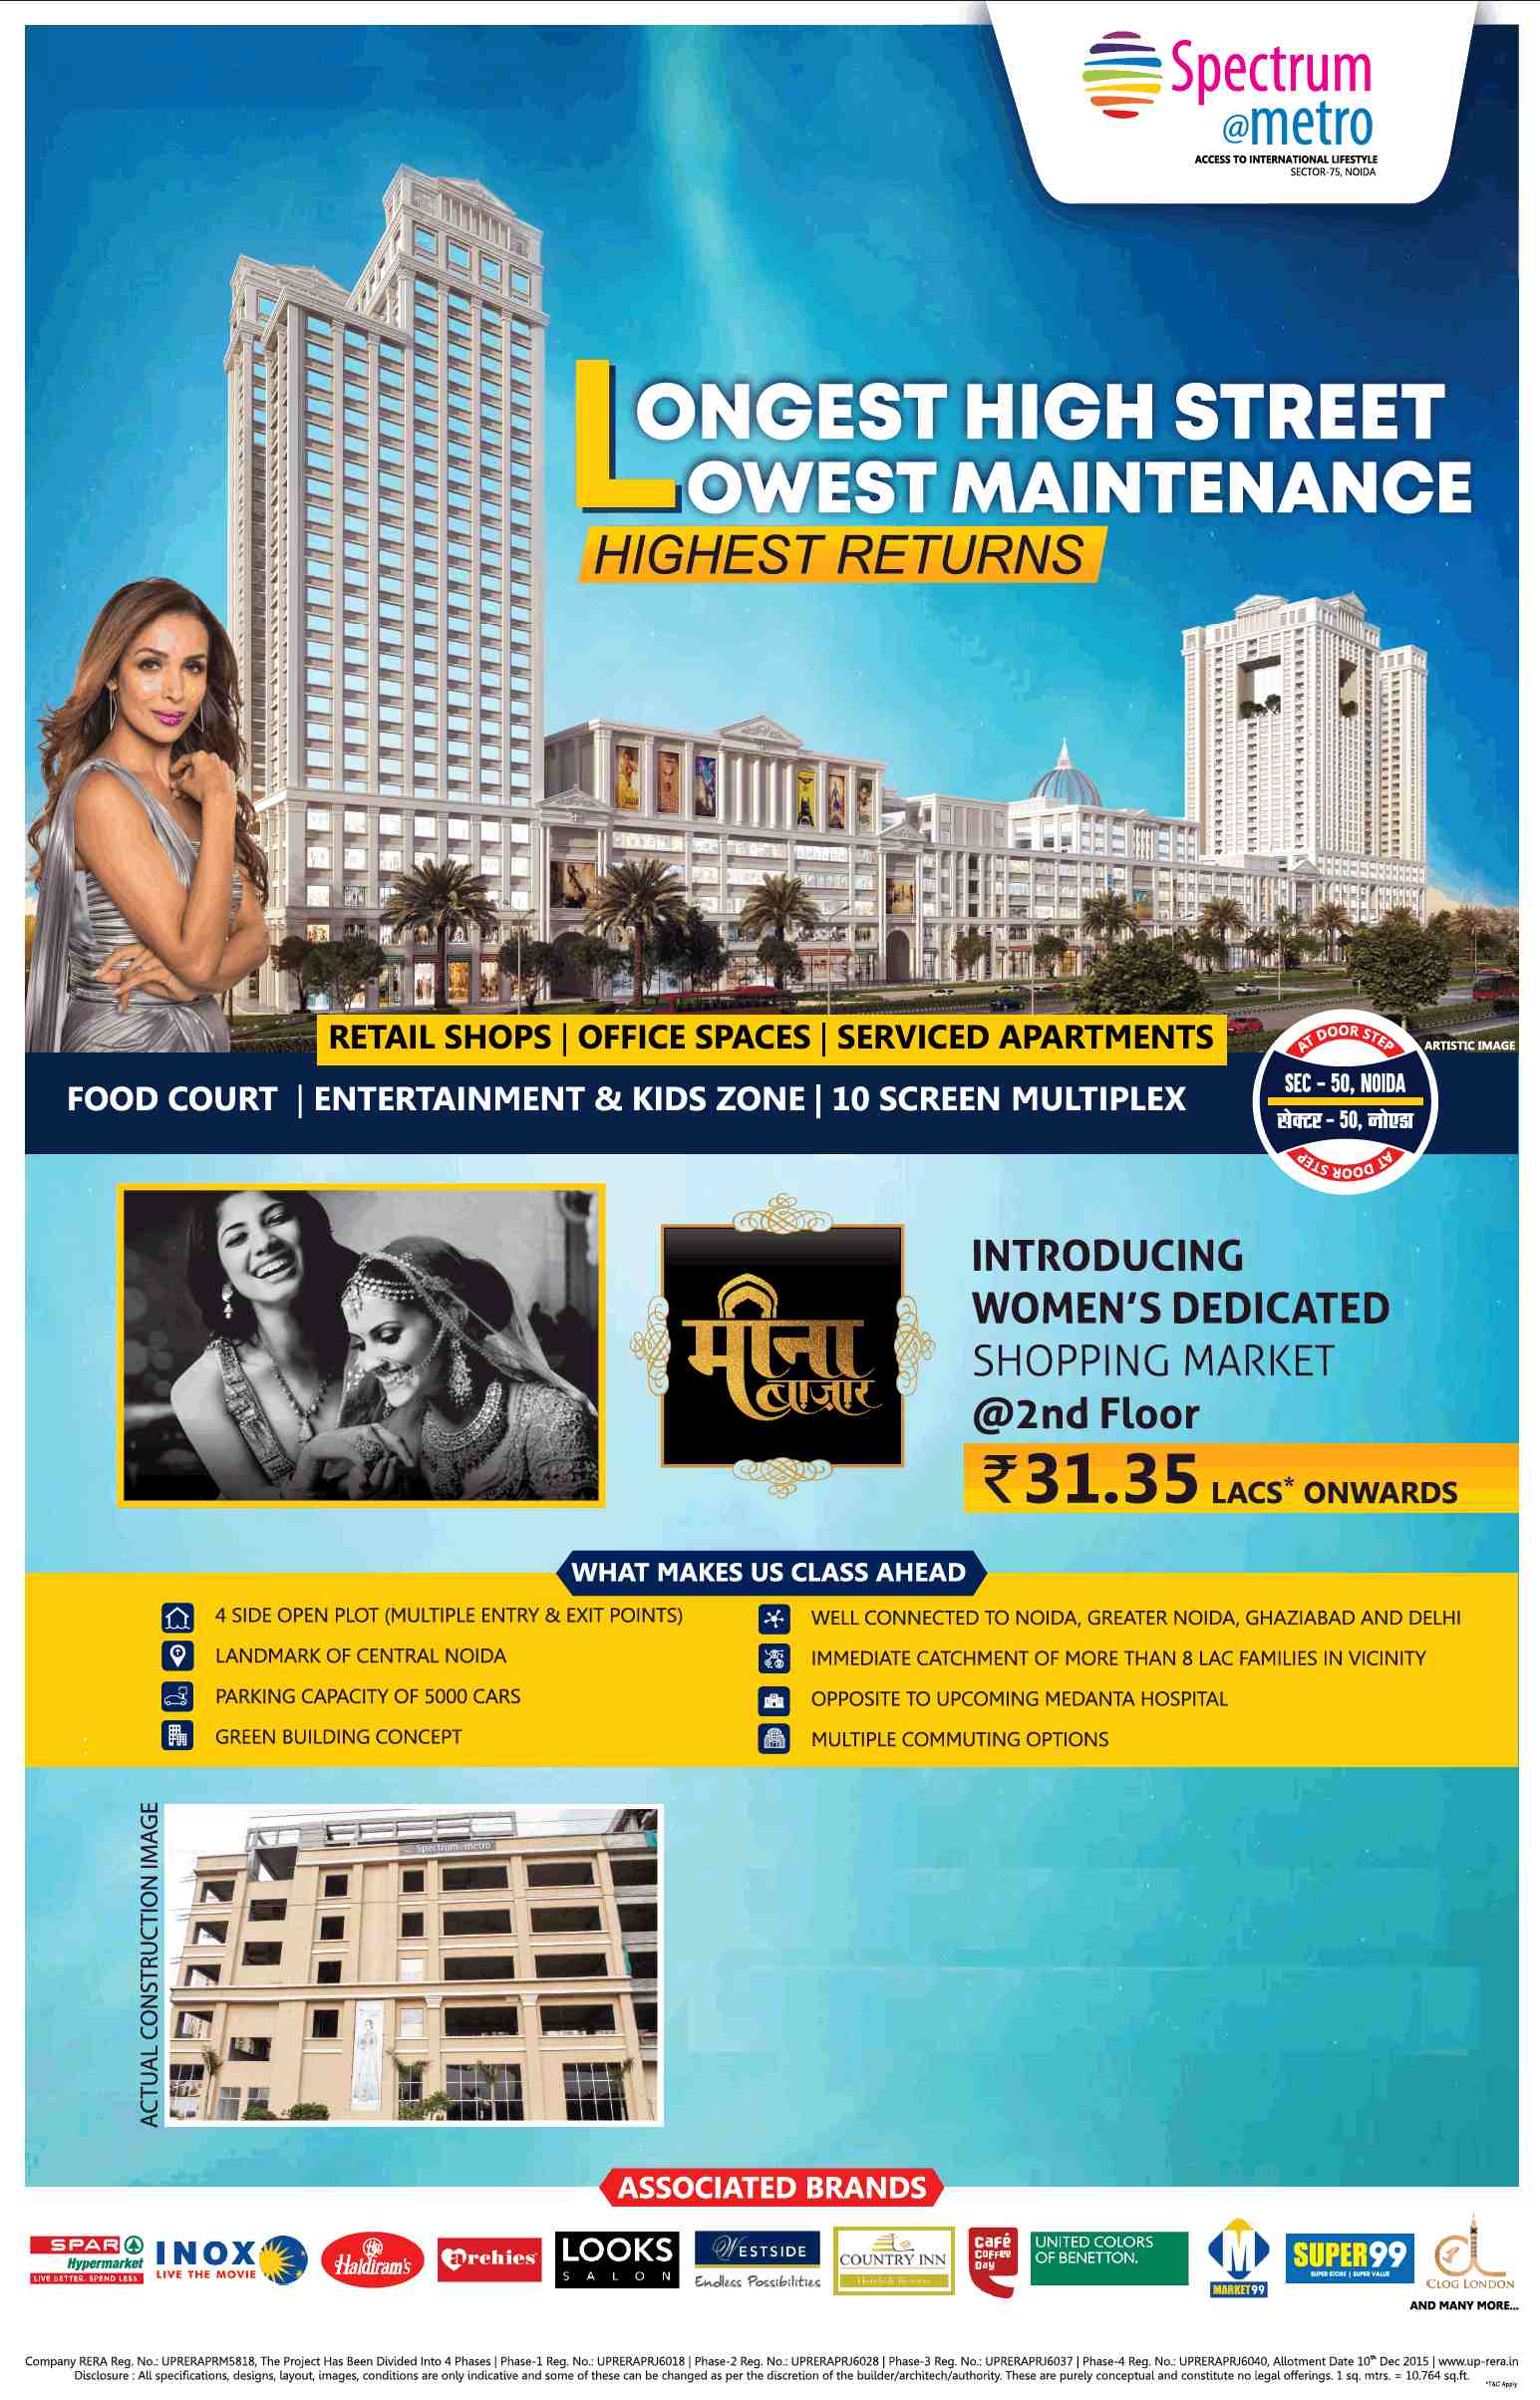 Introducing dedicated shopping market for women @ 31.35 Lacs at Blue Spectrum Metro in Noida